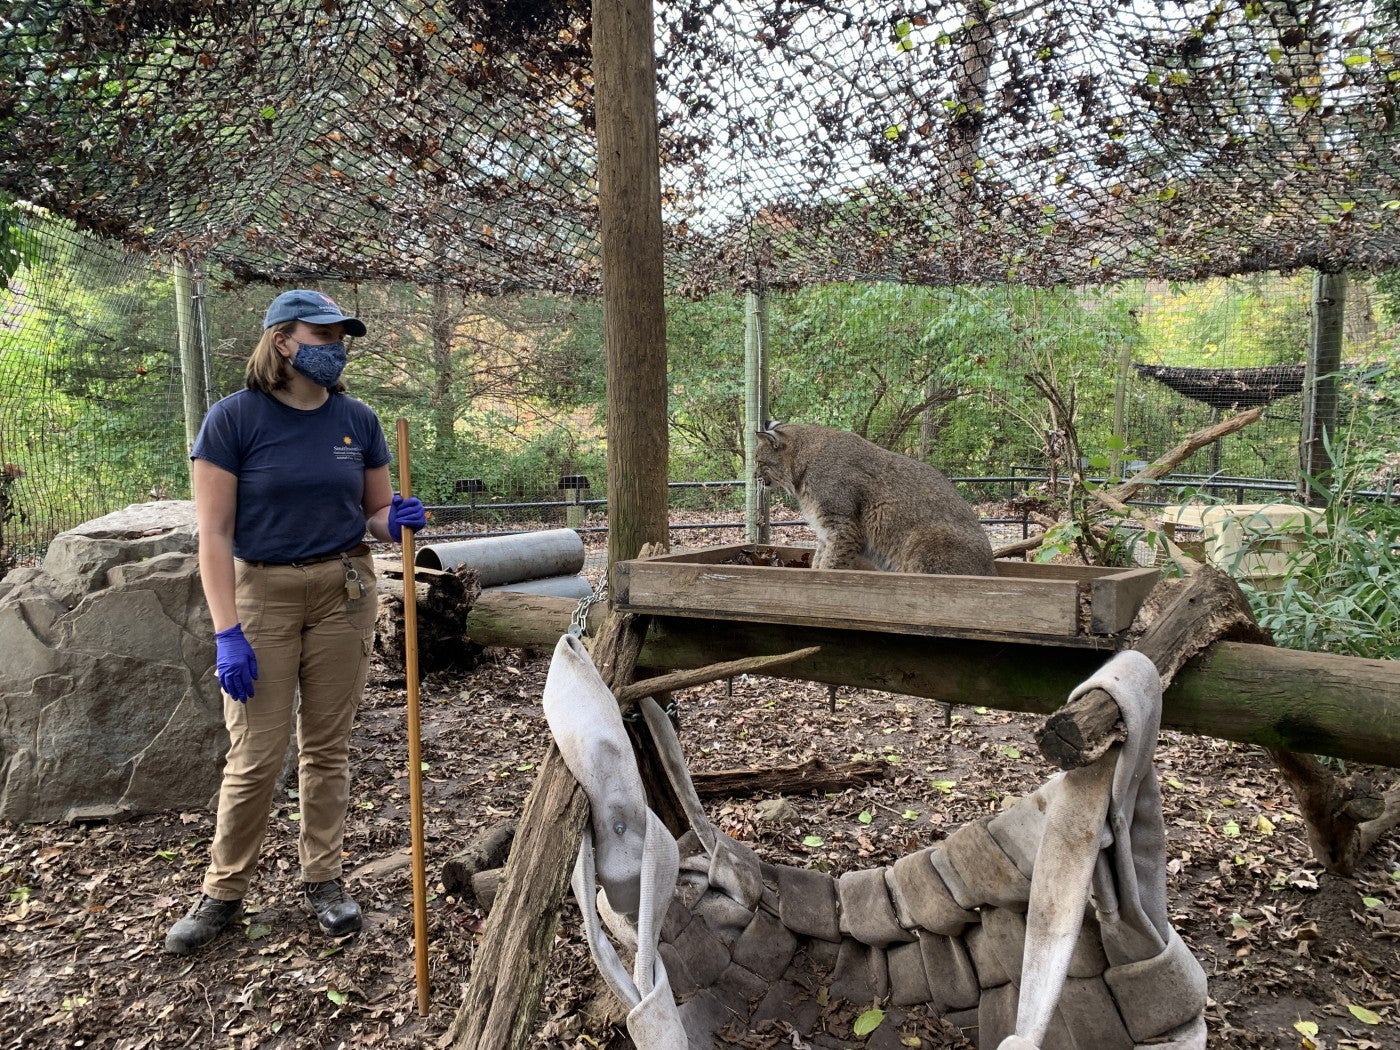 Keeper Katy Juliano stands near one of the Zoo's bobcats in their behind the scenes, outdoor exhibit.